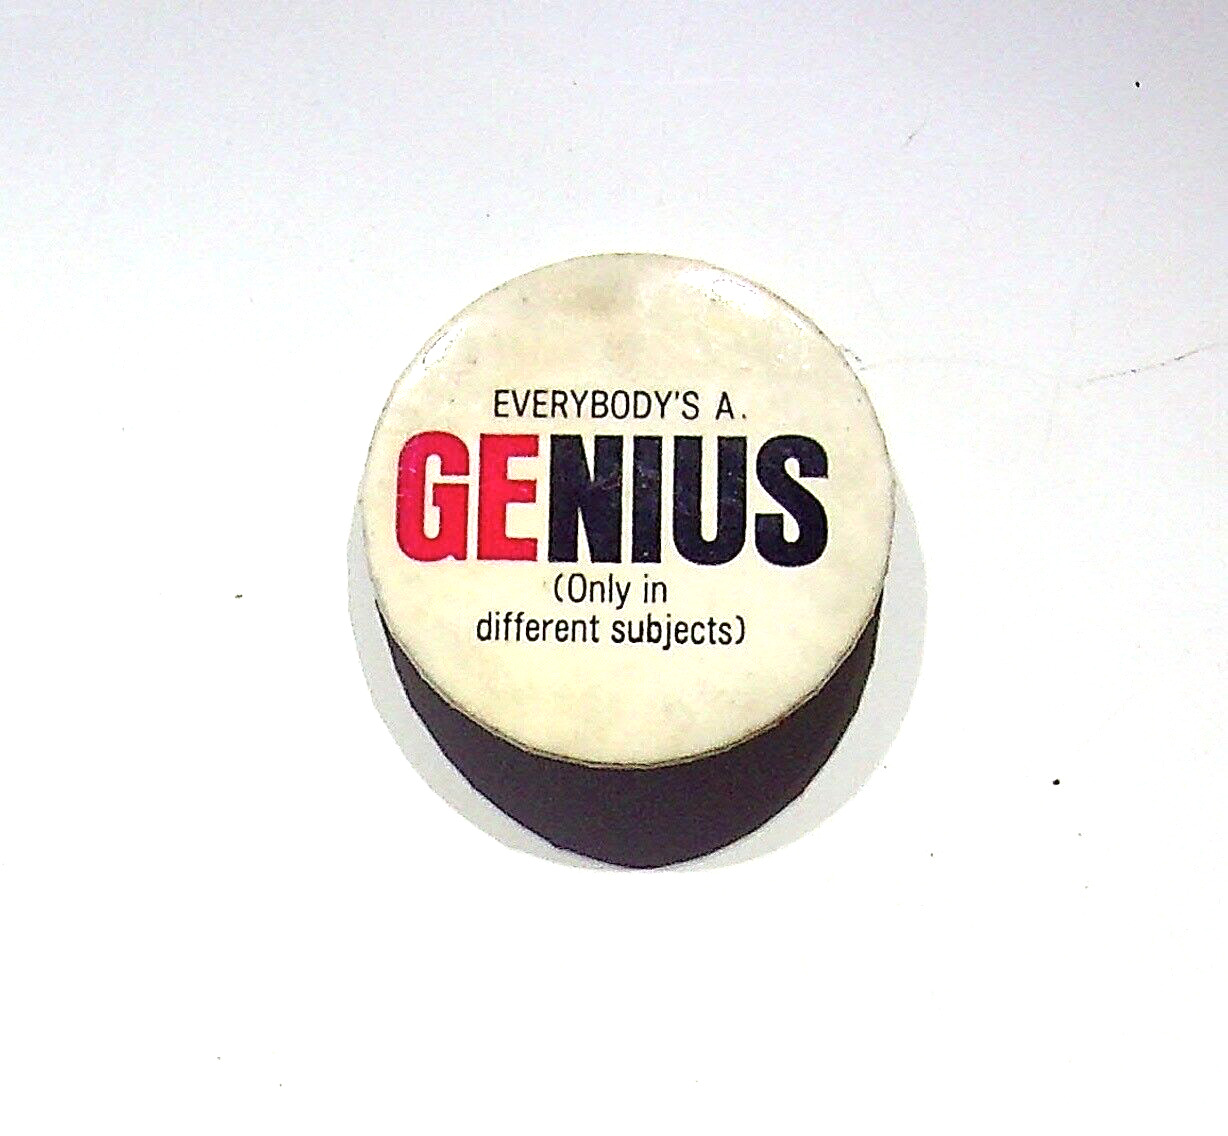 EVERYBODY'S A GENIUS ONLY IN DIFFERENT SUBJECTS - VINTAGE ADVERTISING BUTTON PIN